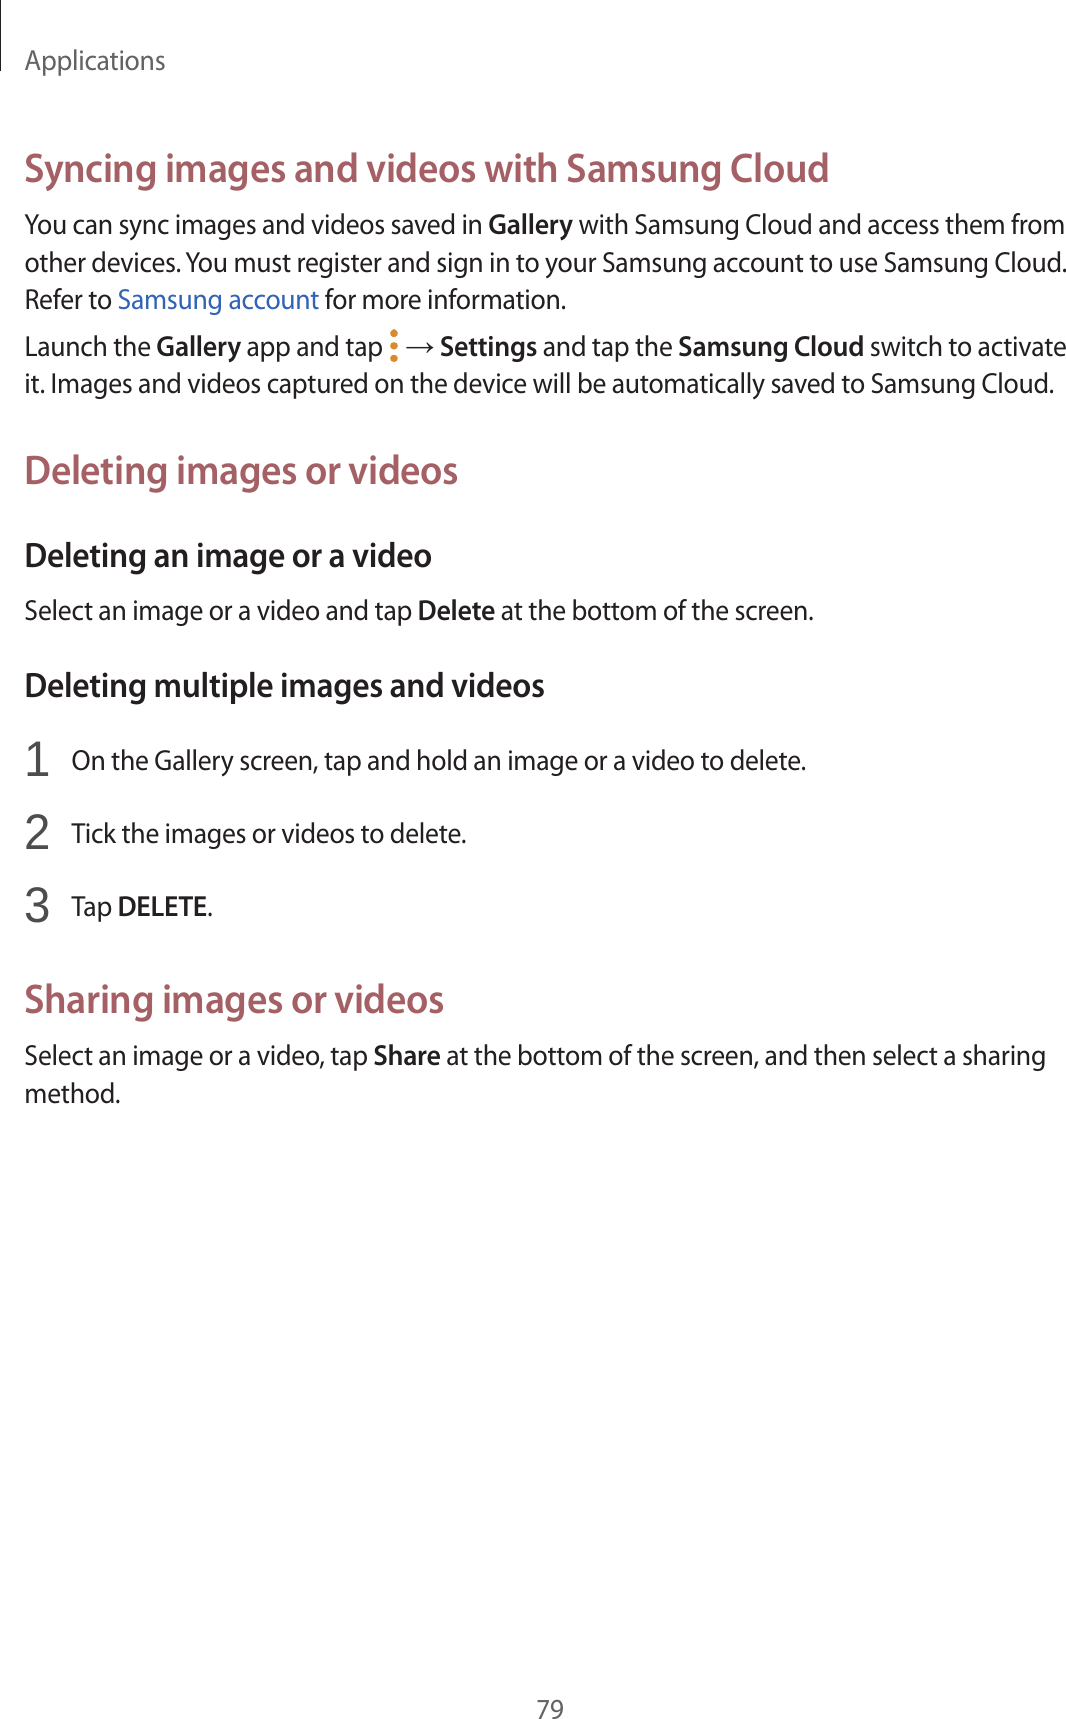 Applications79Syncing images and videos with Samsung CloudYou can sync images and videos saved in Gallery with Samsung Cloud and access them from other devices. You must register and sign in to your Samsung account to use Samsung Cloud. Refer to Samsung account for more information.Launch the Gallery app and tap   → Settings and tap the Samsung Cloud switch to activate it. Images and videos captured on the device will be automatically saved to Samsung Cloud.Deleting images or videosDeleting an image or a videoSelect an image or a video and tap Delete at the bottom of the screen.Deleting multiple images and videos1  On the Gallery screen, tap and hold an image or a video to delete.2  Tick the images or videos to delete.3  Tap DELETE.Sharing images or videosSelect an image or a video, tap Share at the bottom of the screen, and then select a sharing method.